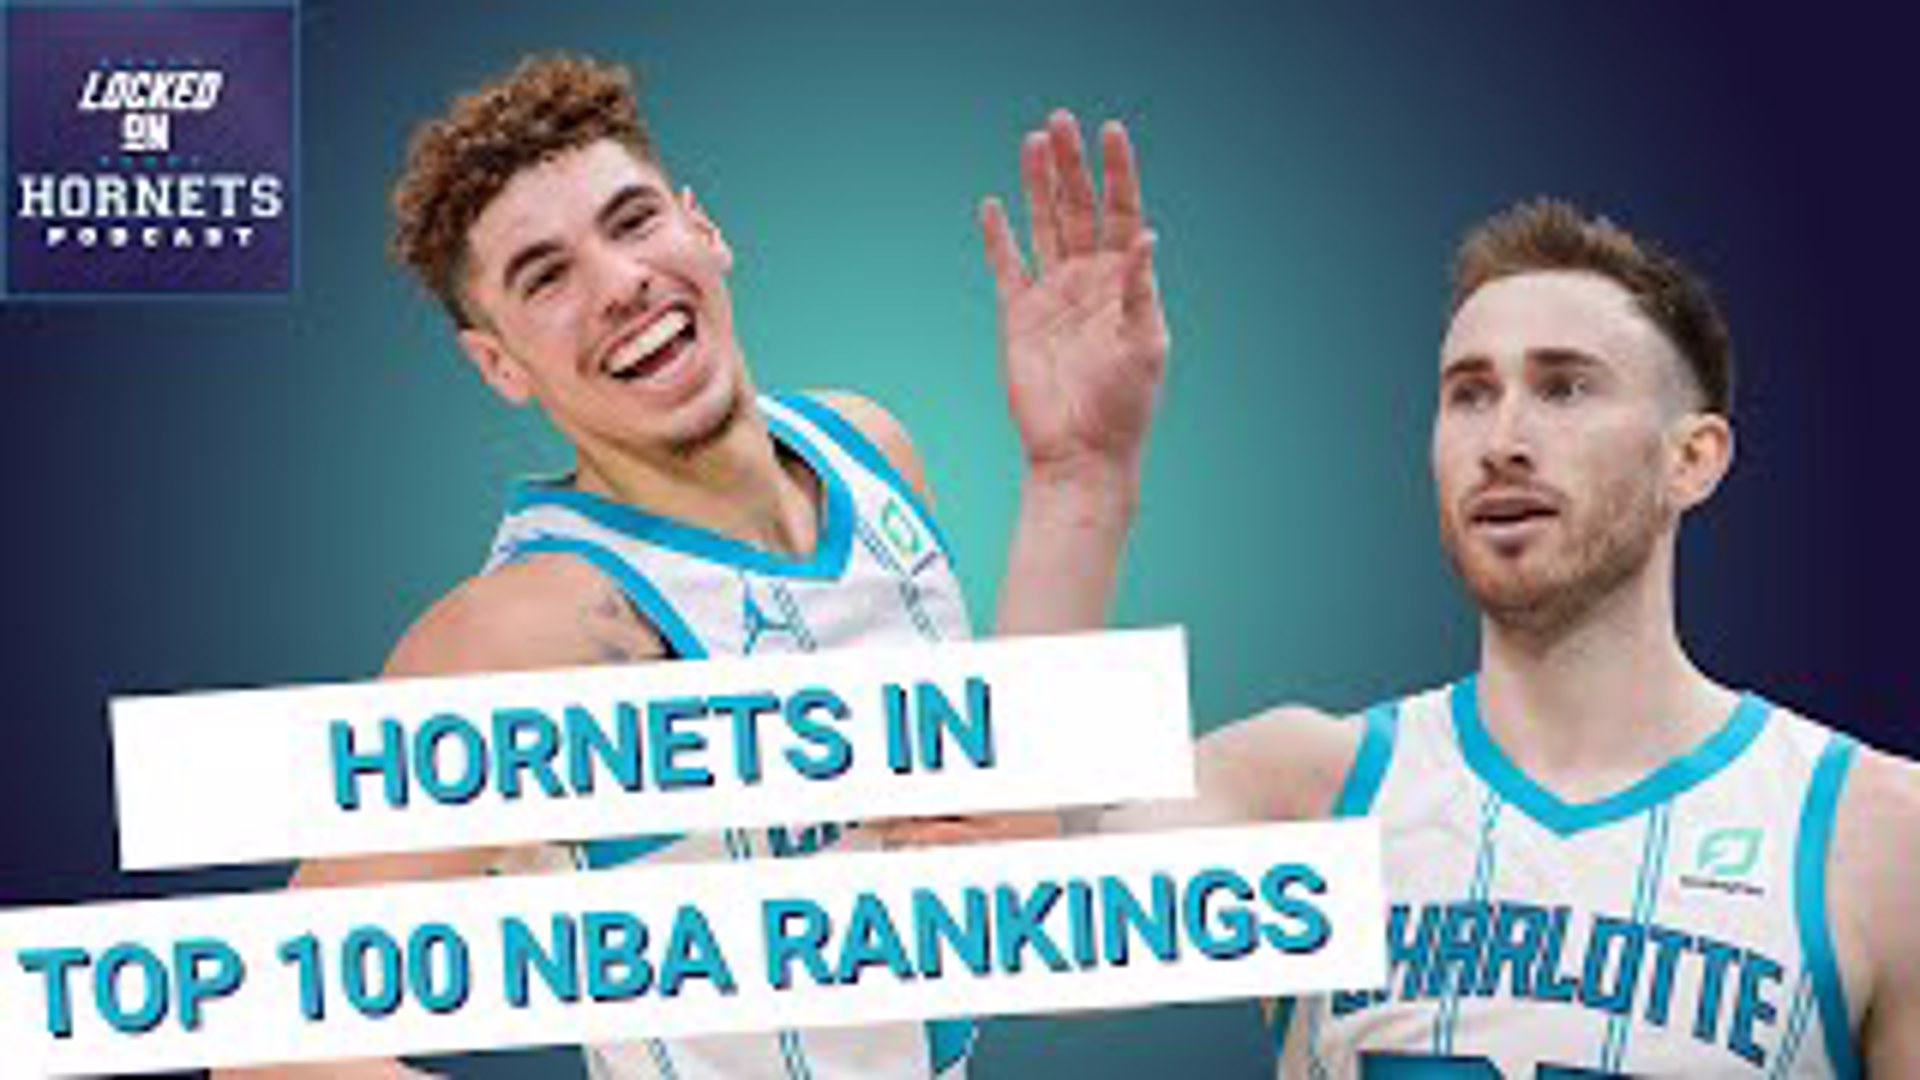 Is there a player the Hornets could possibly pursue, via the trade market, before the season begins? Plus, ESPN and CBS rank the top 100 NBA players.